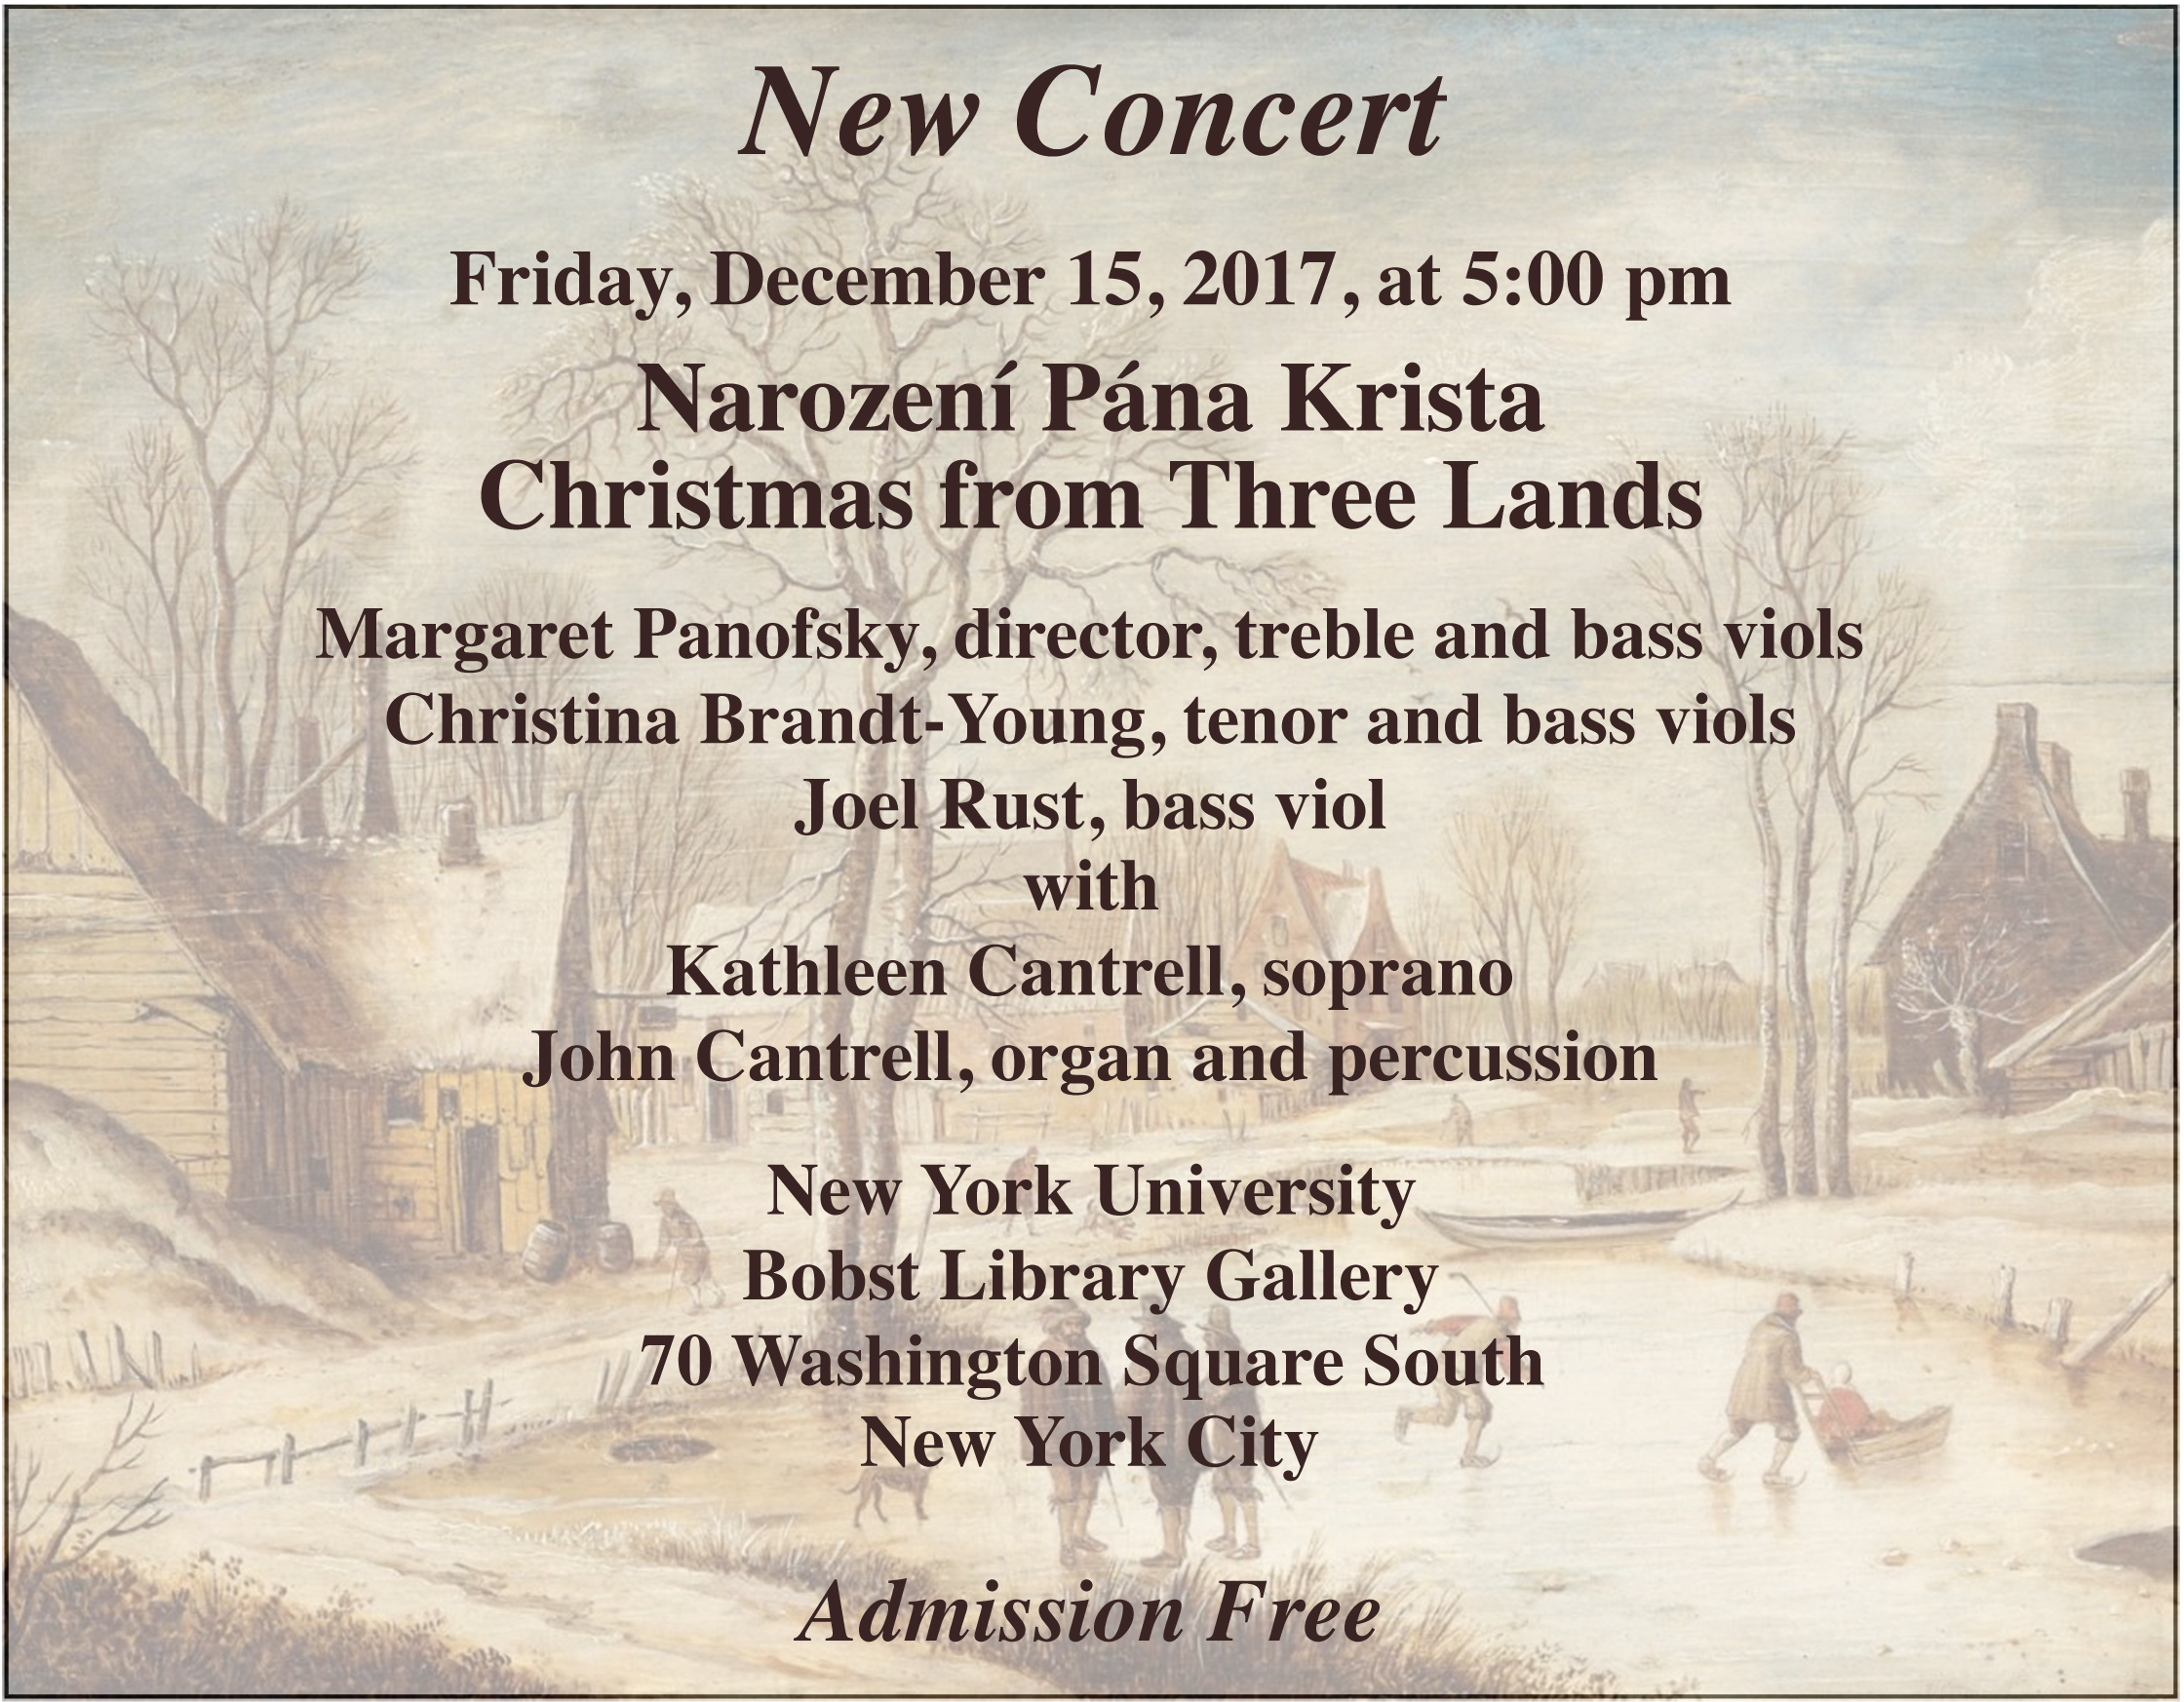 New Concert: Friday, December 15, 2017, at 5:00 pm. Nazorení Pána Krista: Christmas from Three Lands. Margaret Panofsky, director, treble and bass viols; Christina Brandt-Young, tenor and bass viols; Joel Rust, bass viol; with Kathleen Cantrell, soprano; John Cantrell, organ and percussion. New York University, Bobst Library Gallery, 70 Washington Square South, New York City. Admission Free